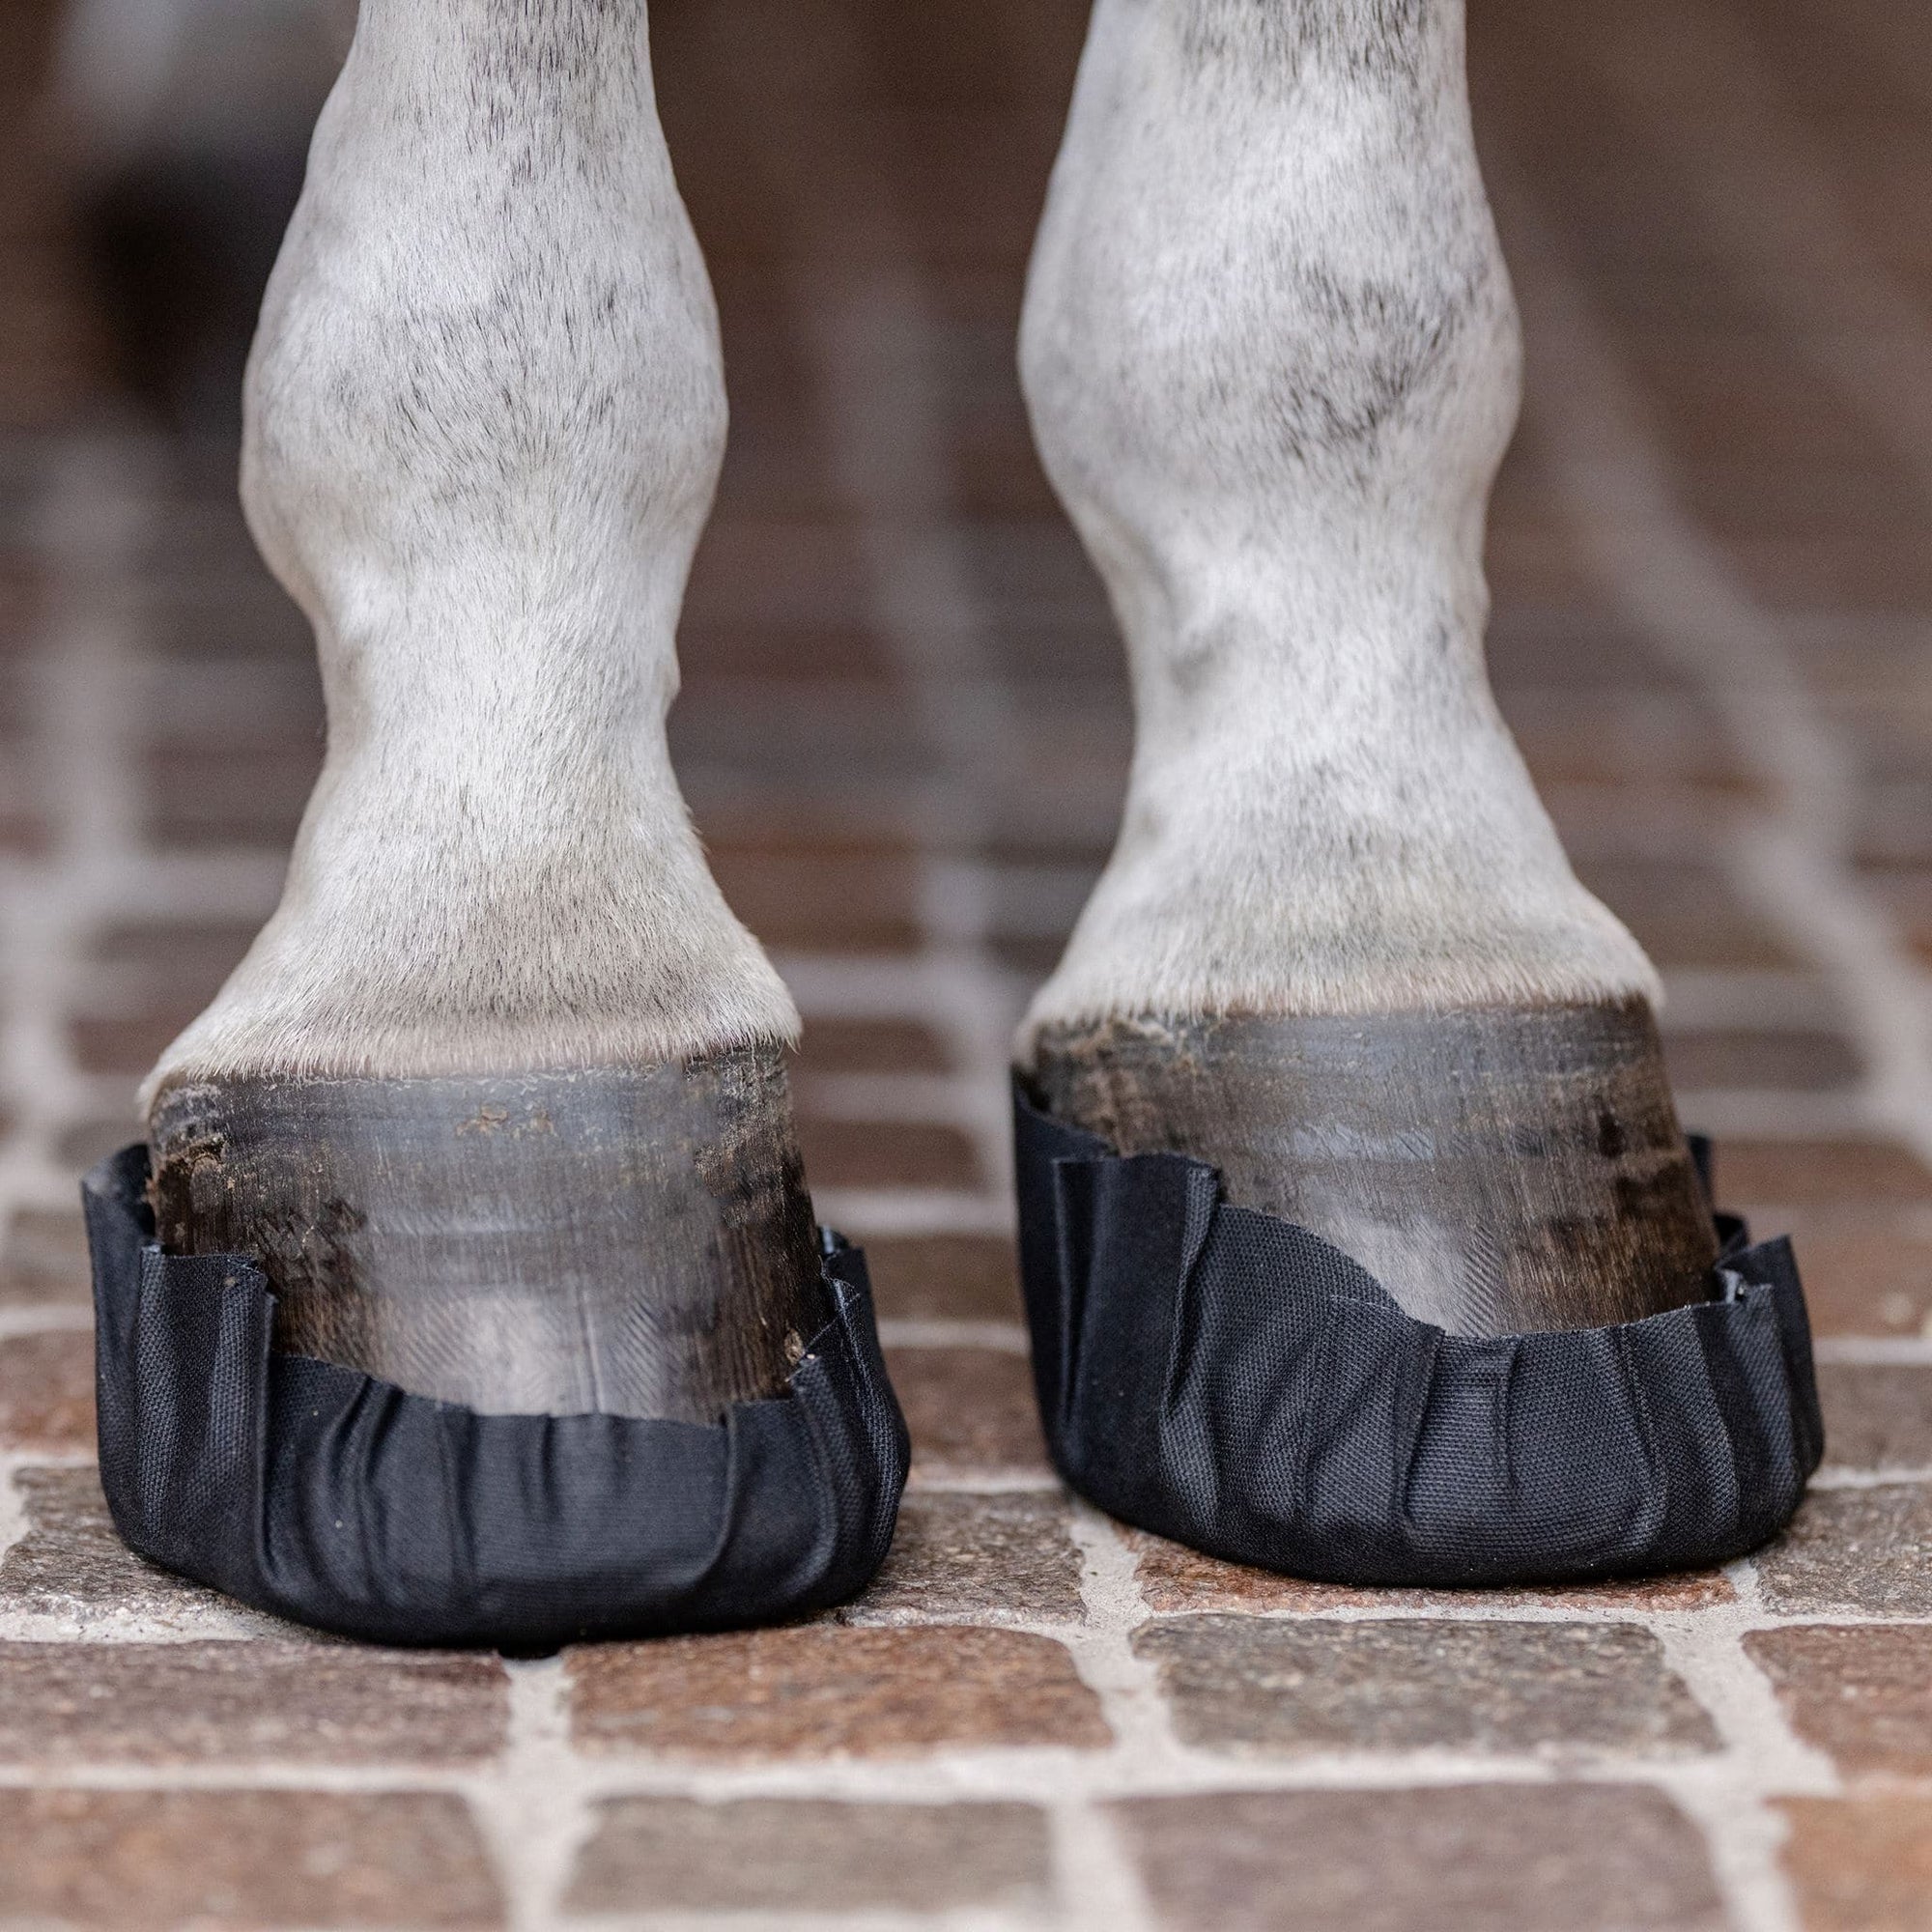 Pack-N-Stick Hoof Tape eliminates hassle with pre-cut and are anatomically shaped to ensure correct placement on the hoof, avoiding the sensitive coronet band